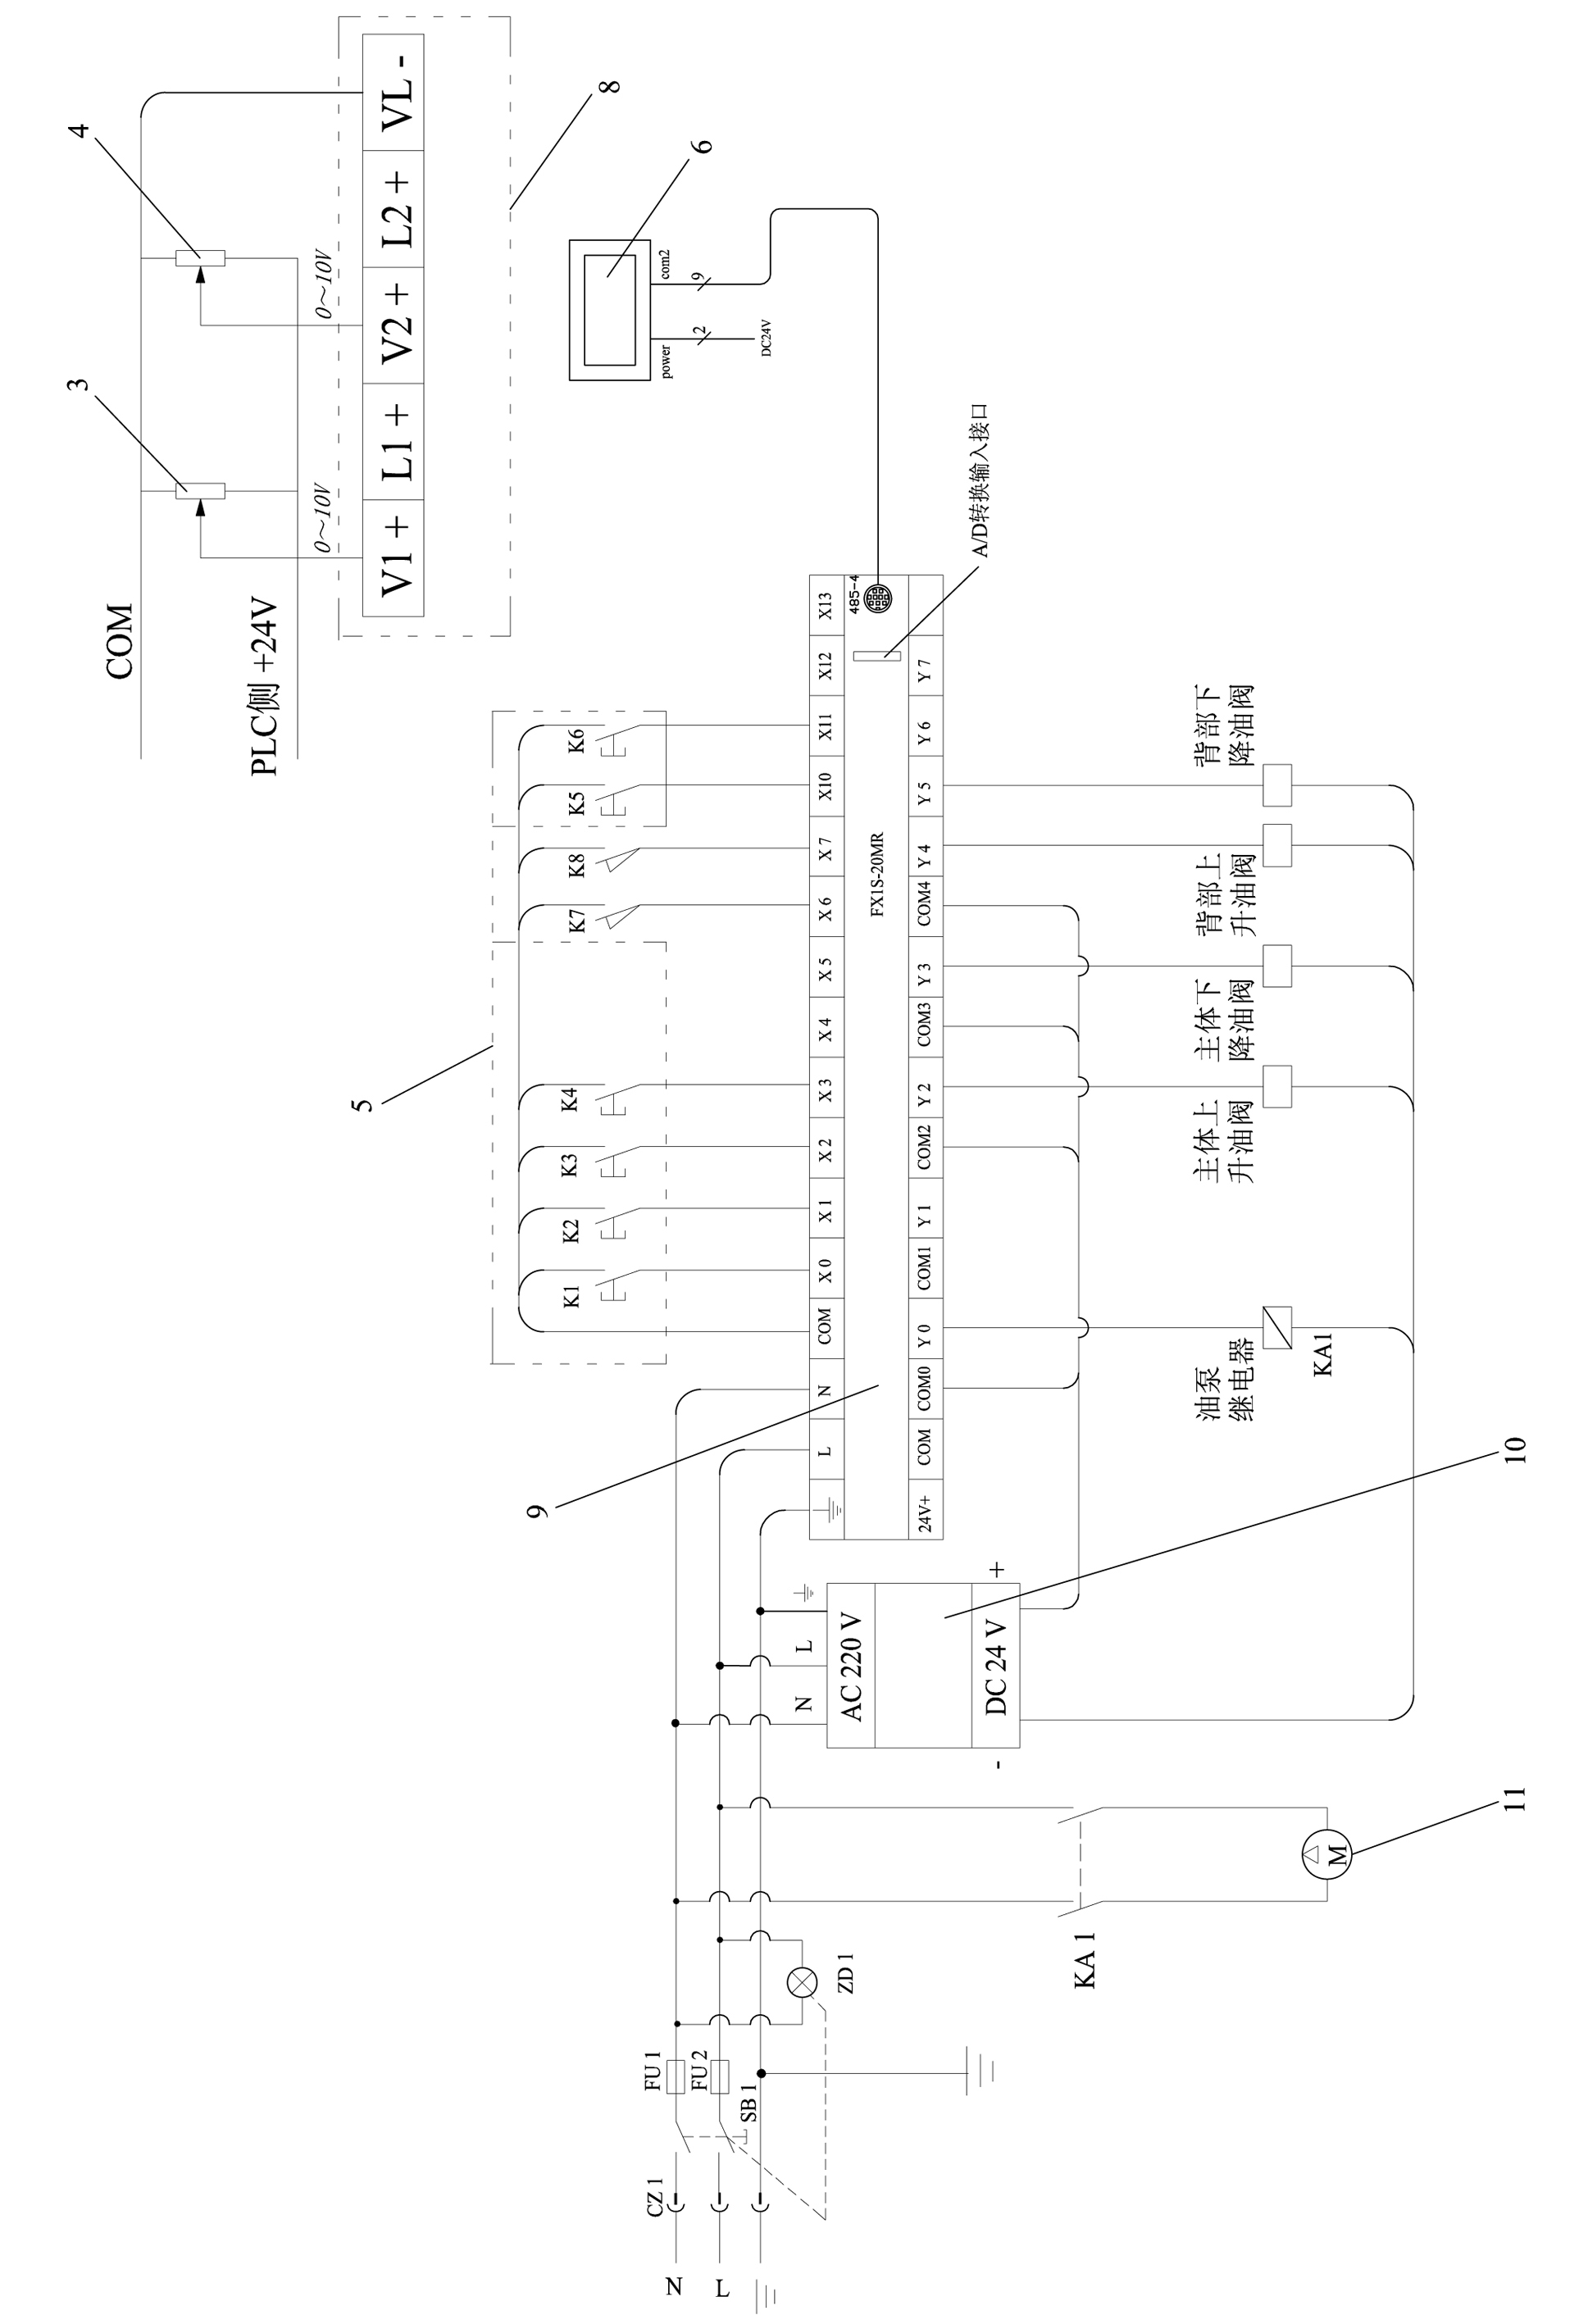 Operating table control device